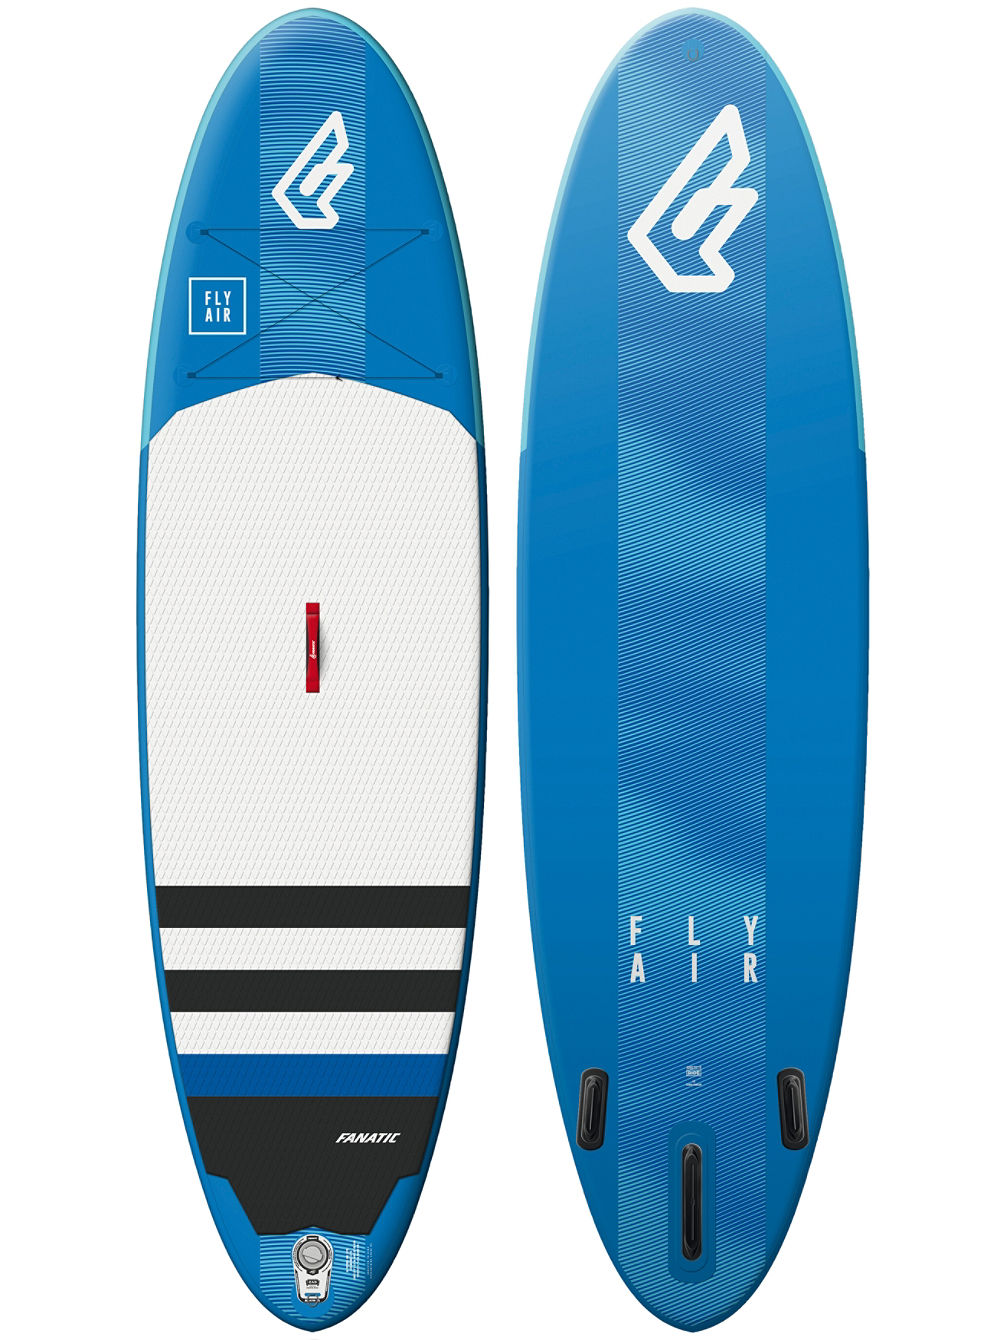 Fly Air 10.4 Package SUP Board